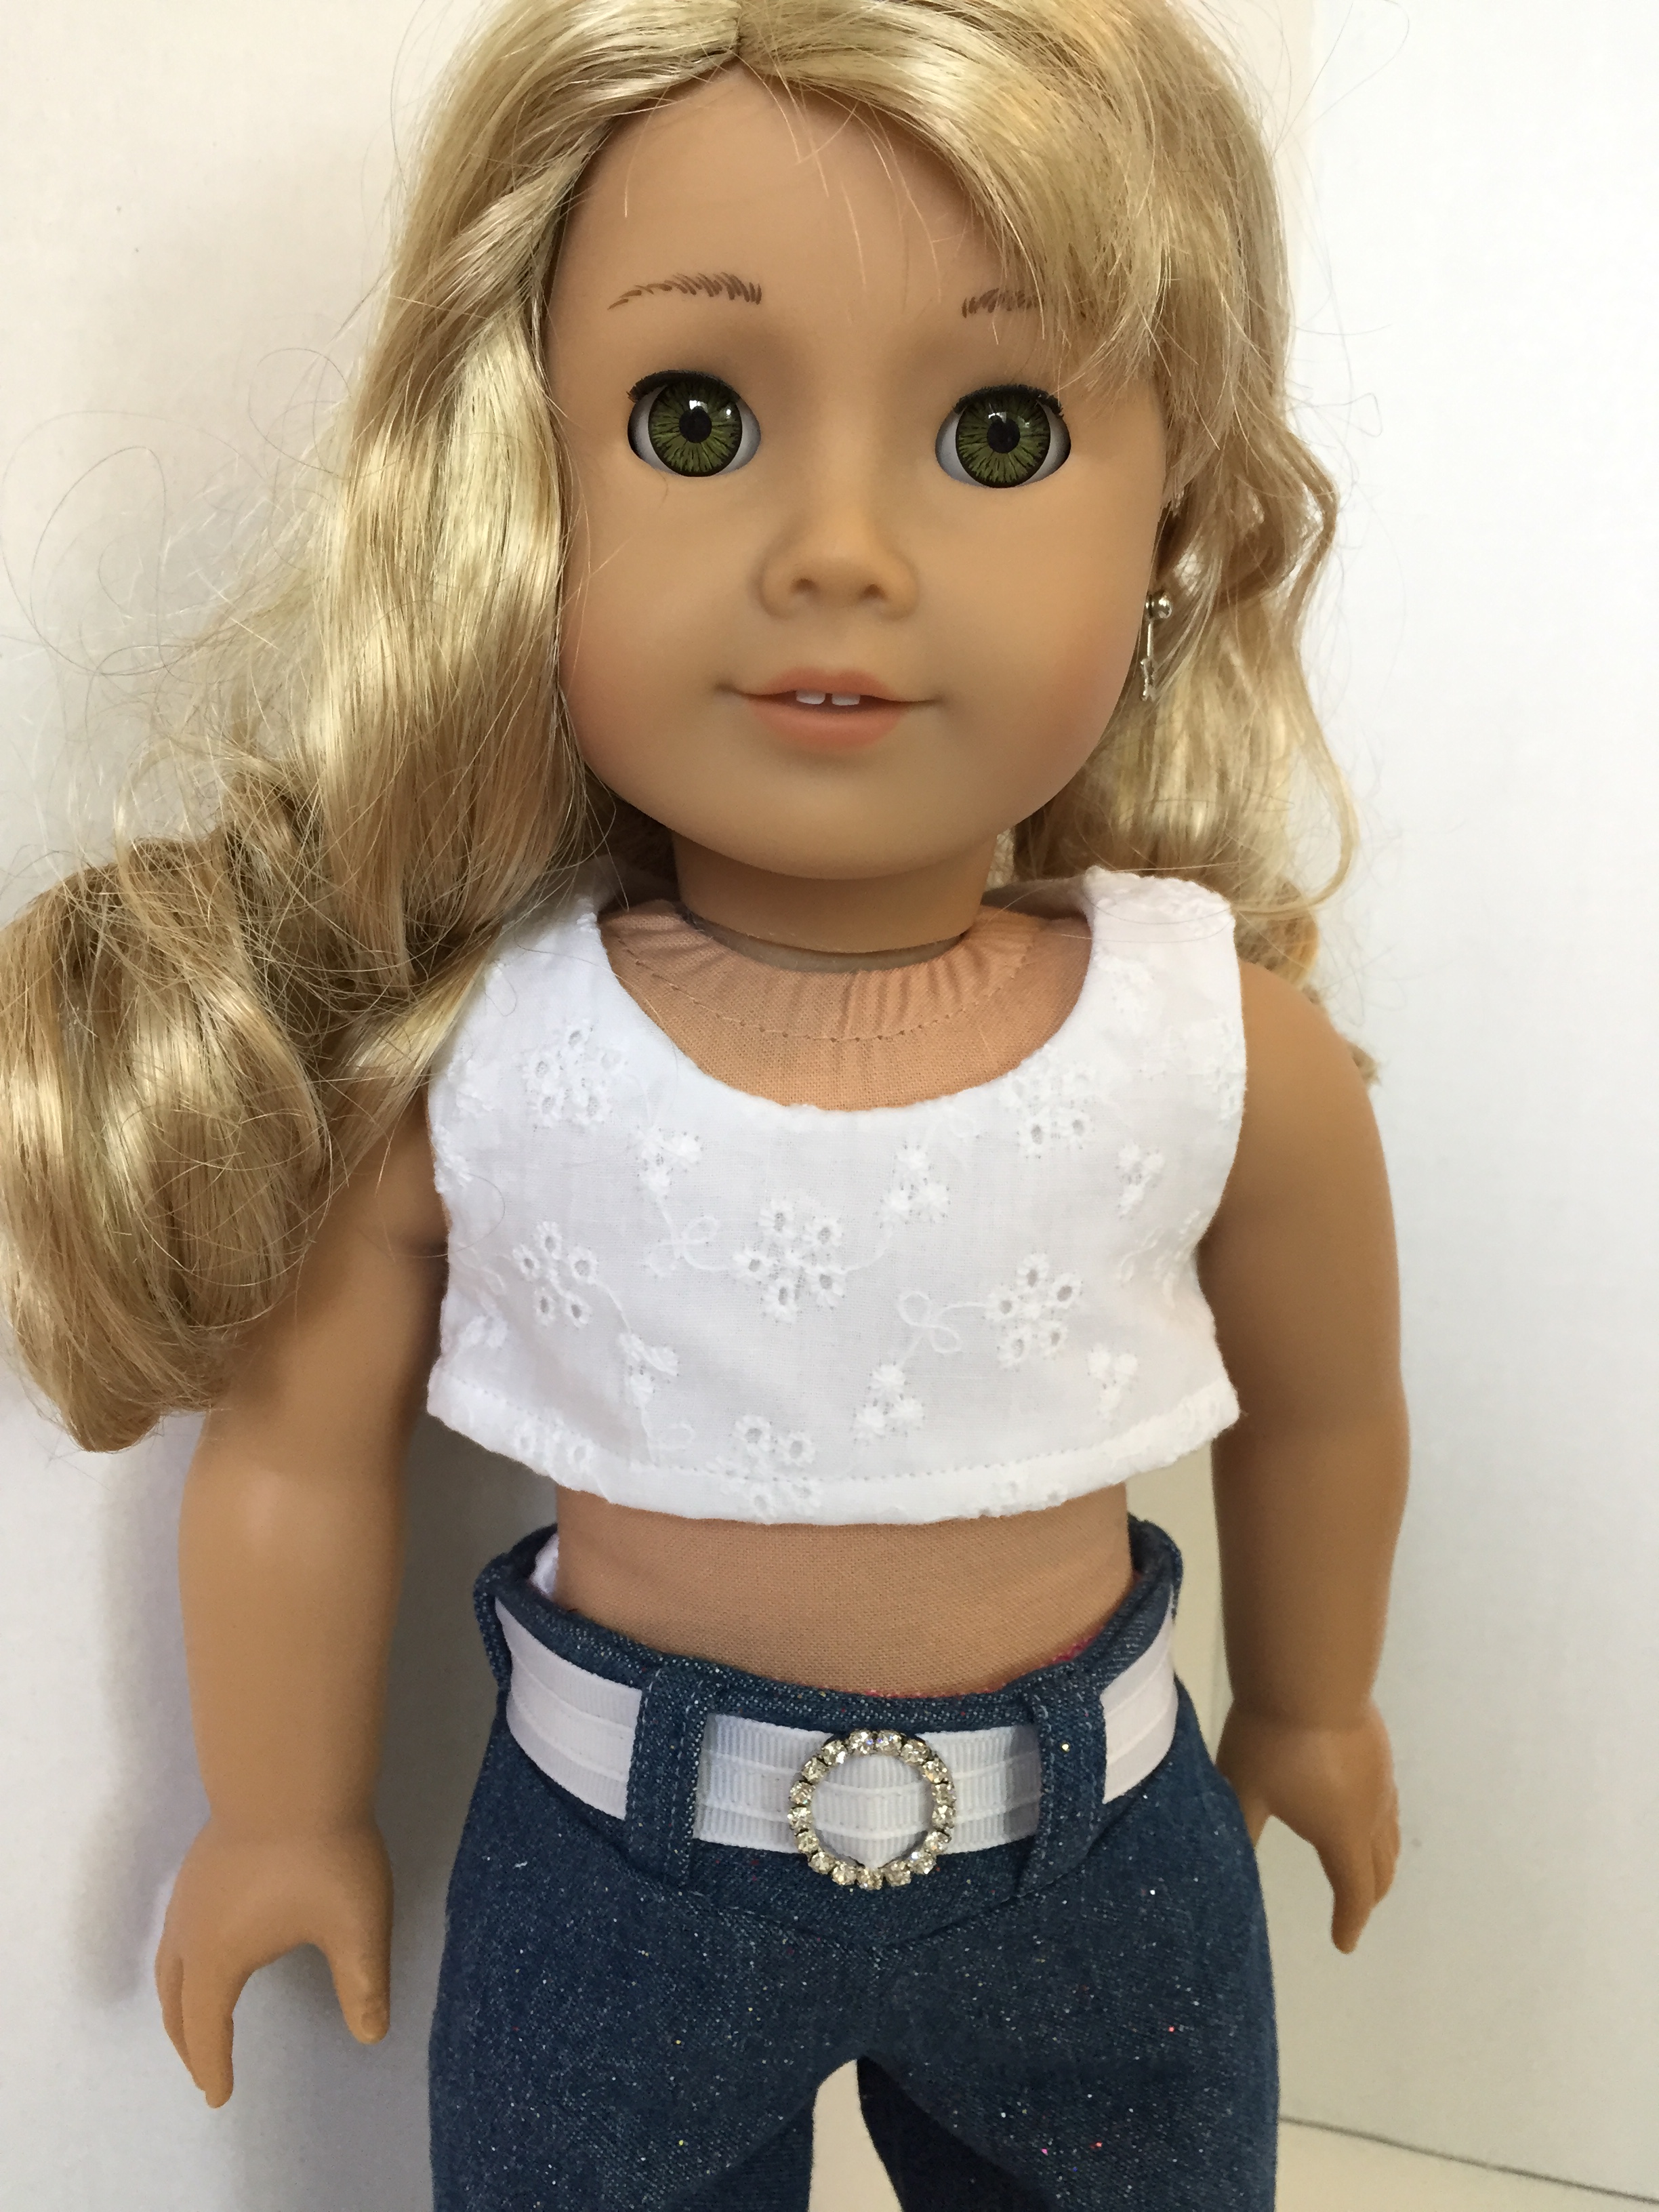 Make a cute midriff crop top for 18 inch dolls with the easy Popsicle Top PDF sewing pattern by OhSewKat.